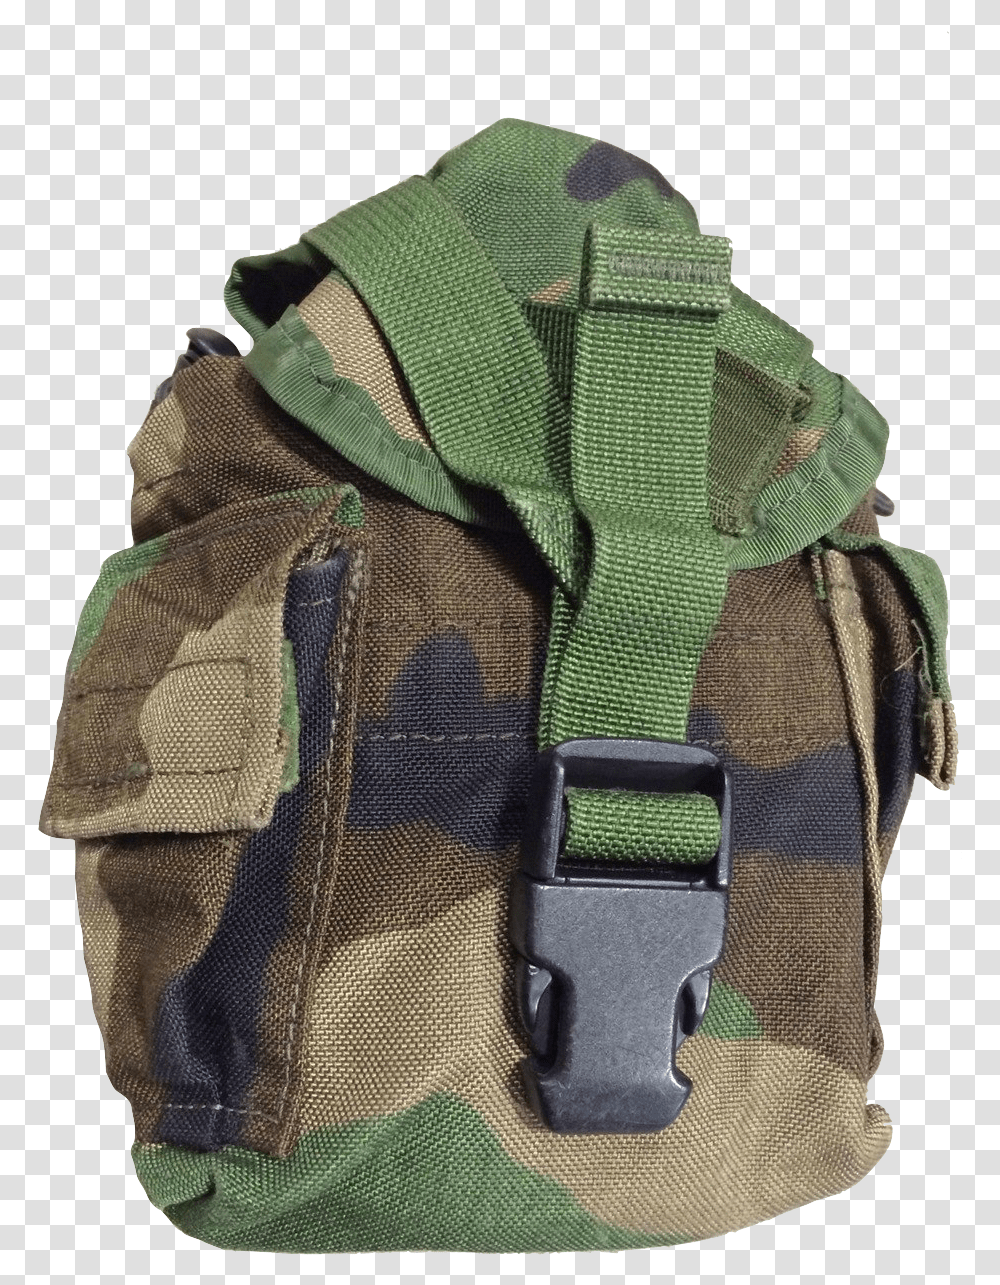 Flash Bang Grenade Pouch Molle Ii Military Acu Camo Messenger Bag, Backpack, Military Uniform, Apparel Transparent Png